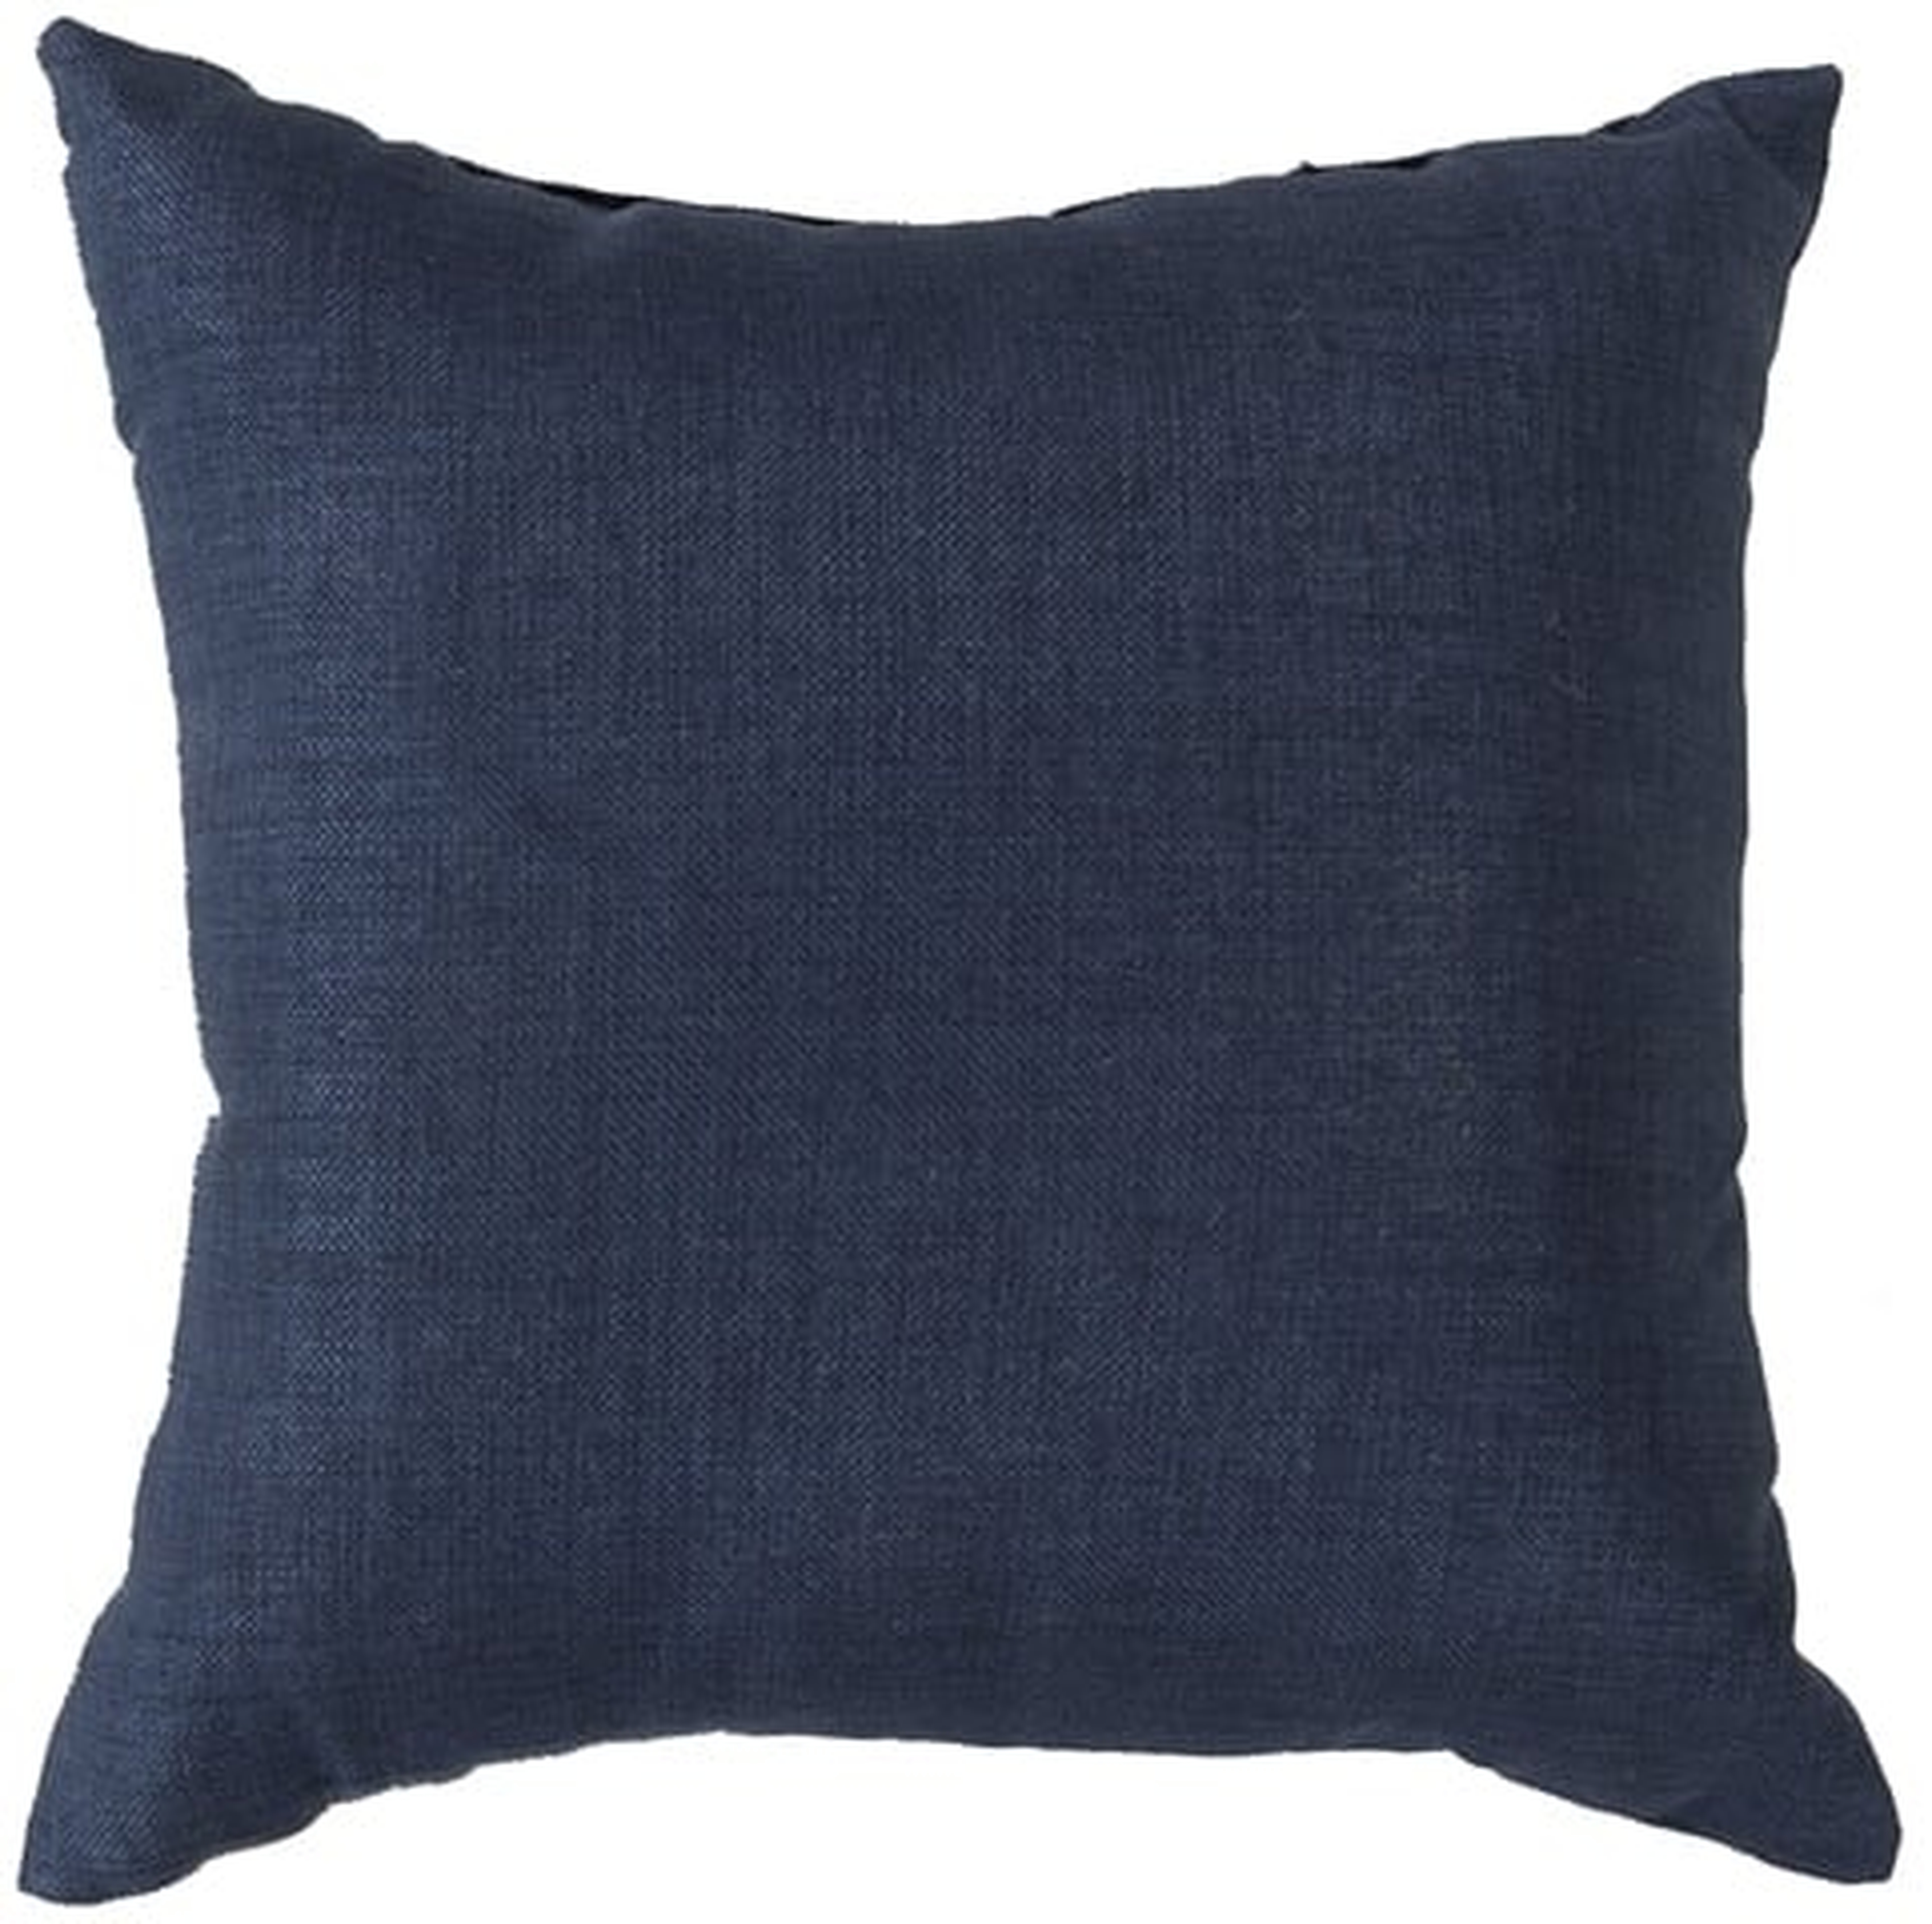 MOSELLE INDOOR/OUTDOOR PILLOW - 22" x 22" - Polyester Filled - Lulu and Georgia